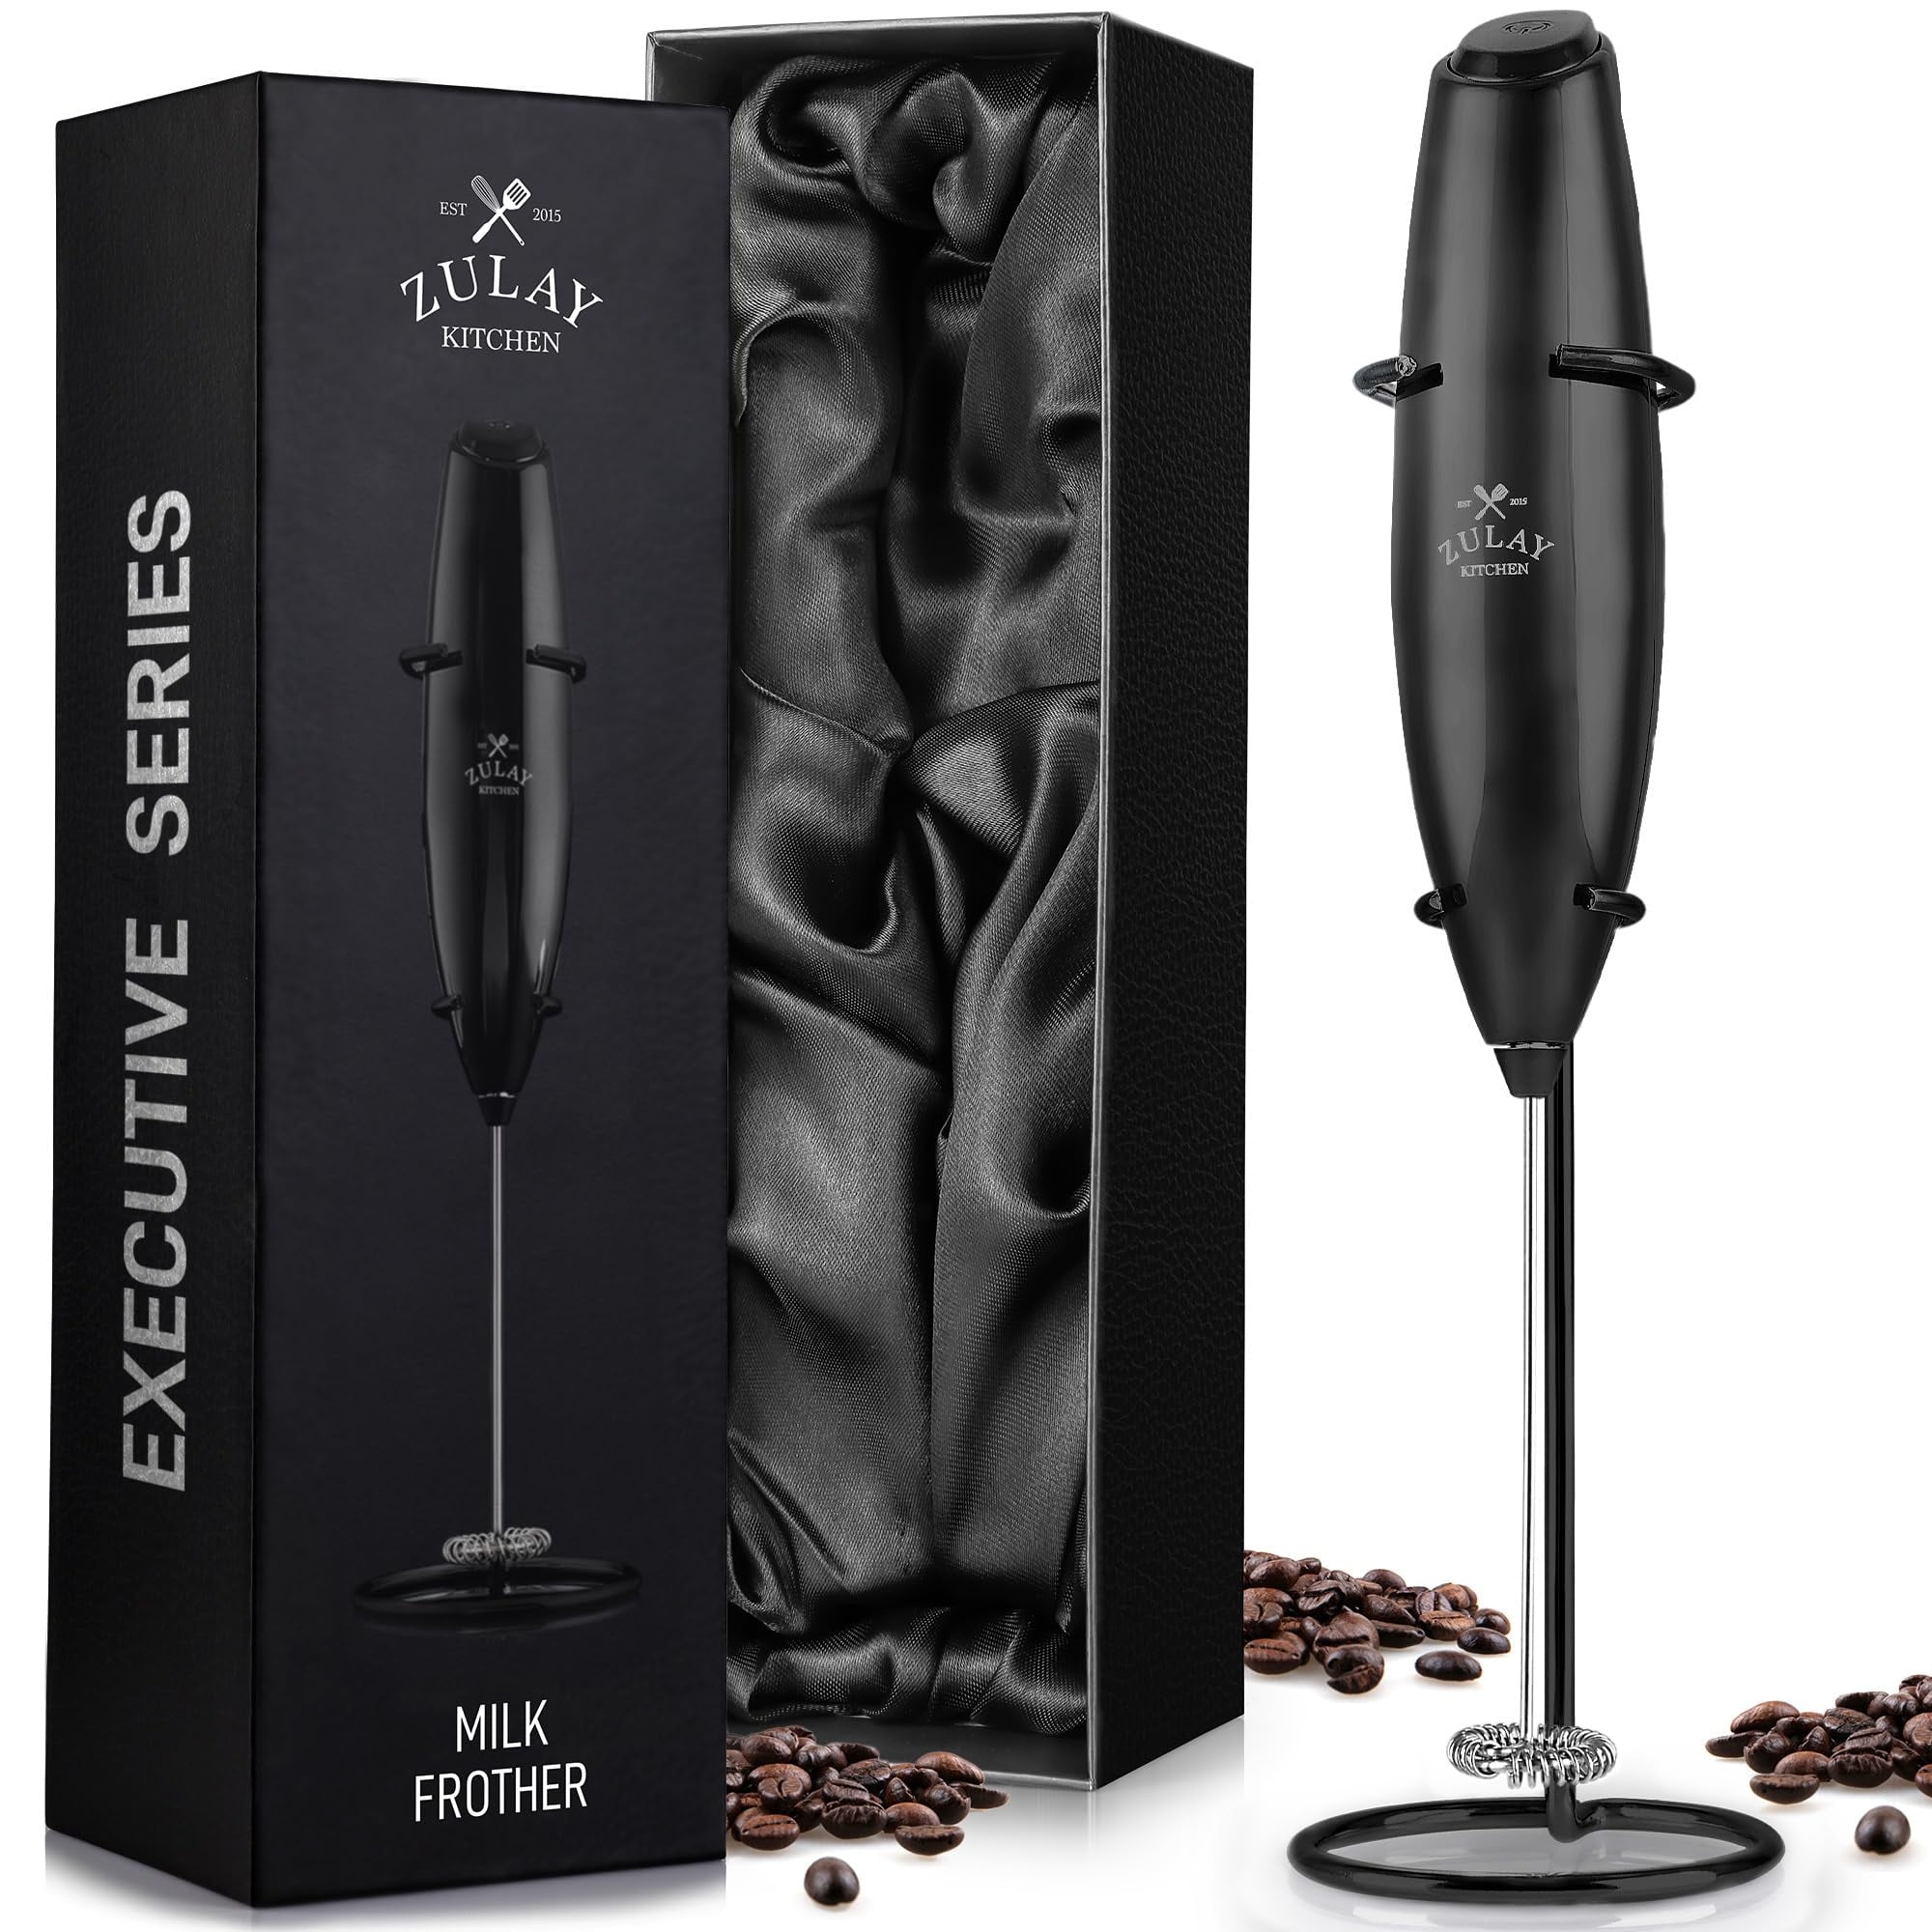 JEEXI Pro Milk Frother Handheld With Stand - Powerful Coffee Frother  Electric Handheld Mixer & Foam Maker - Battery Operated Frother For Coffee,  Lattes, Matcha & More 